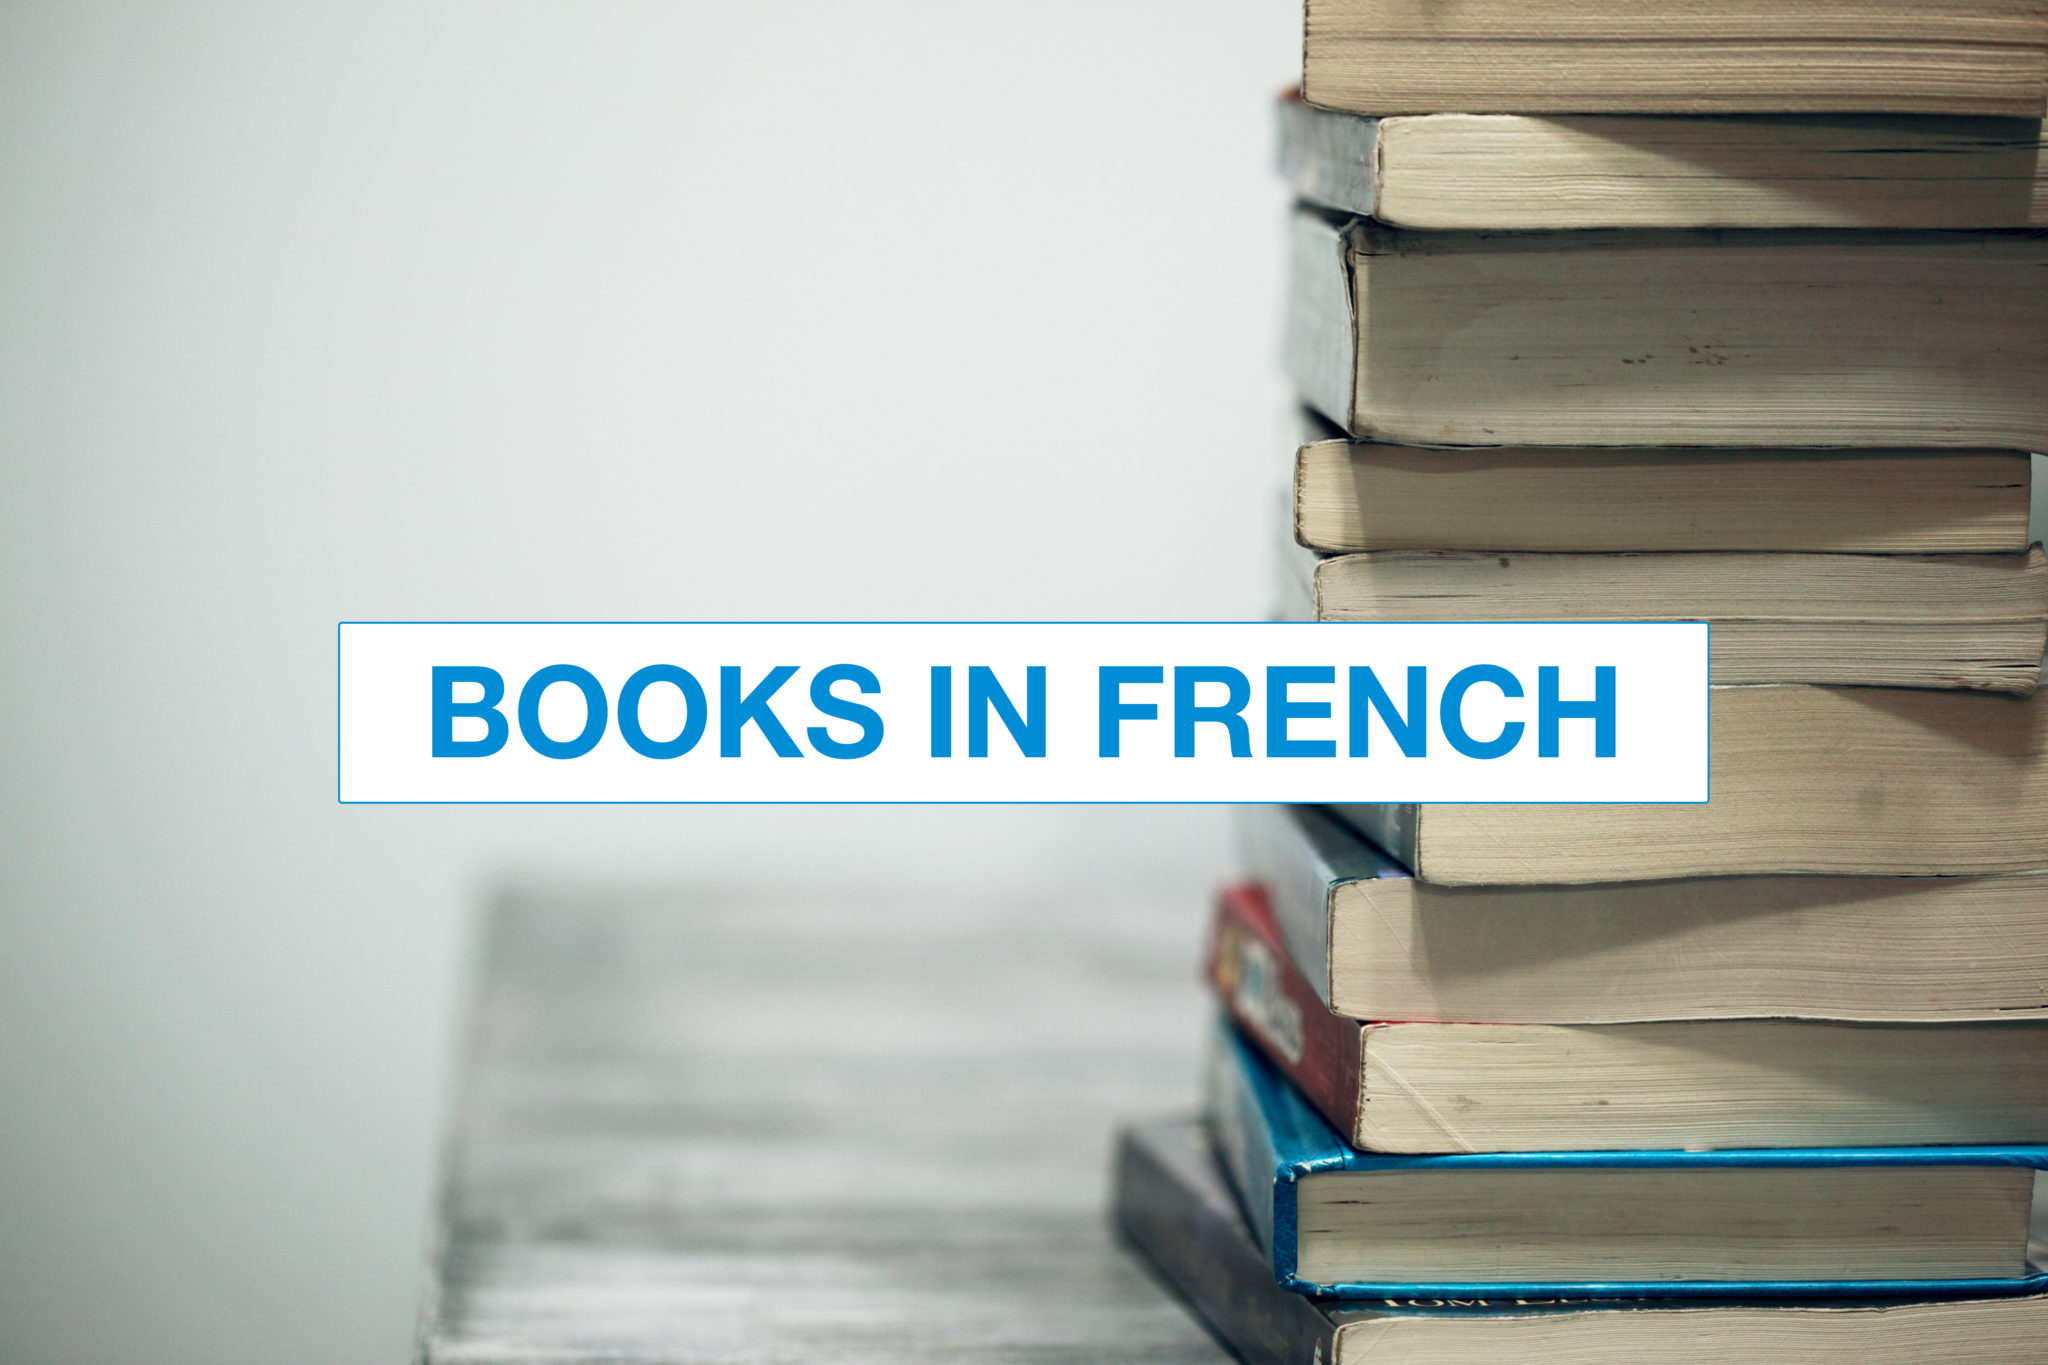 BOOKS IN FRENCH